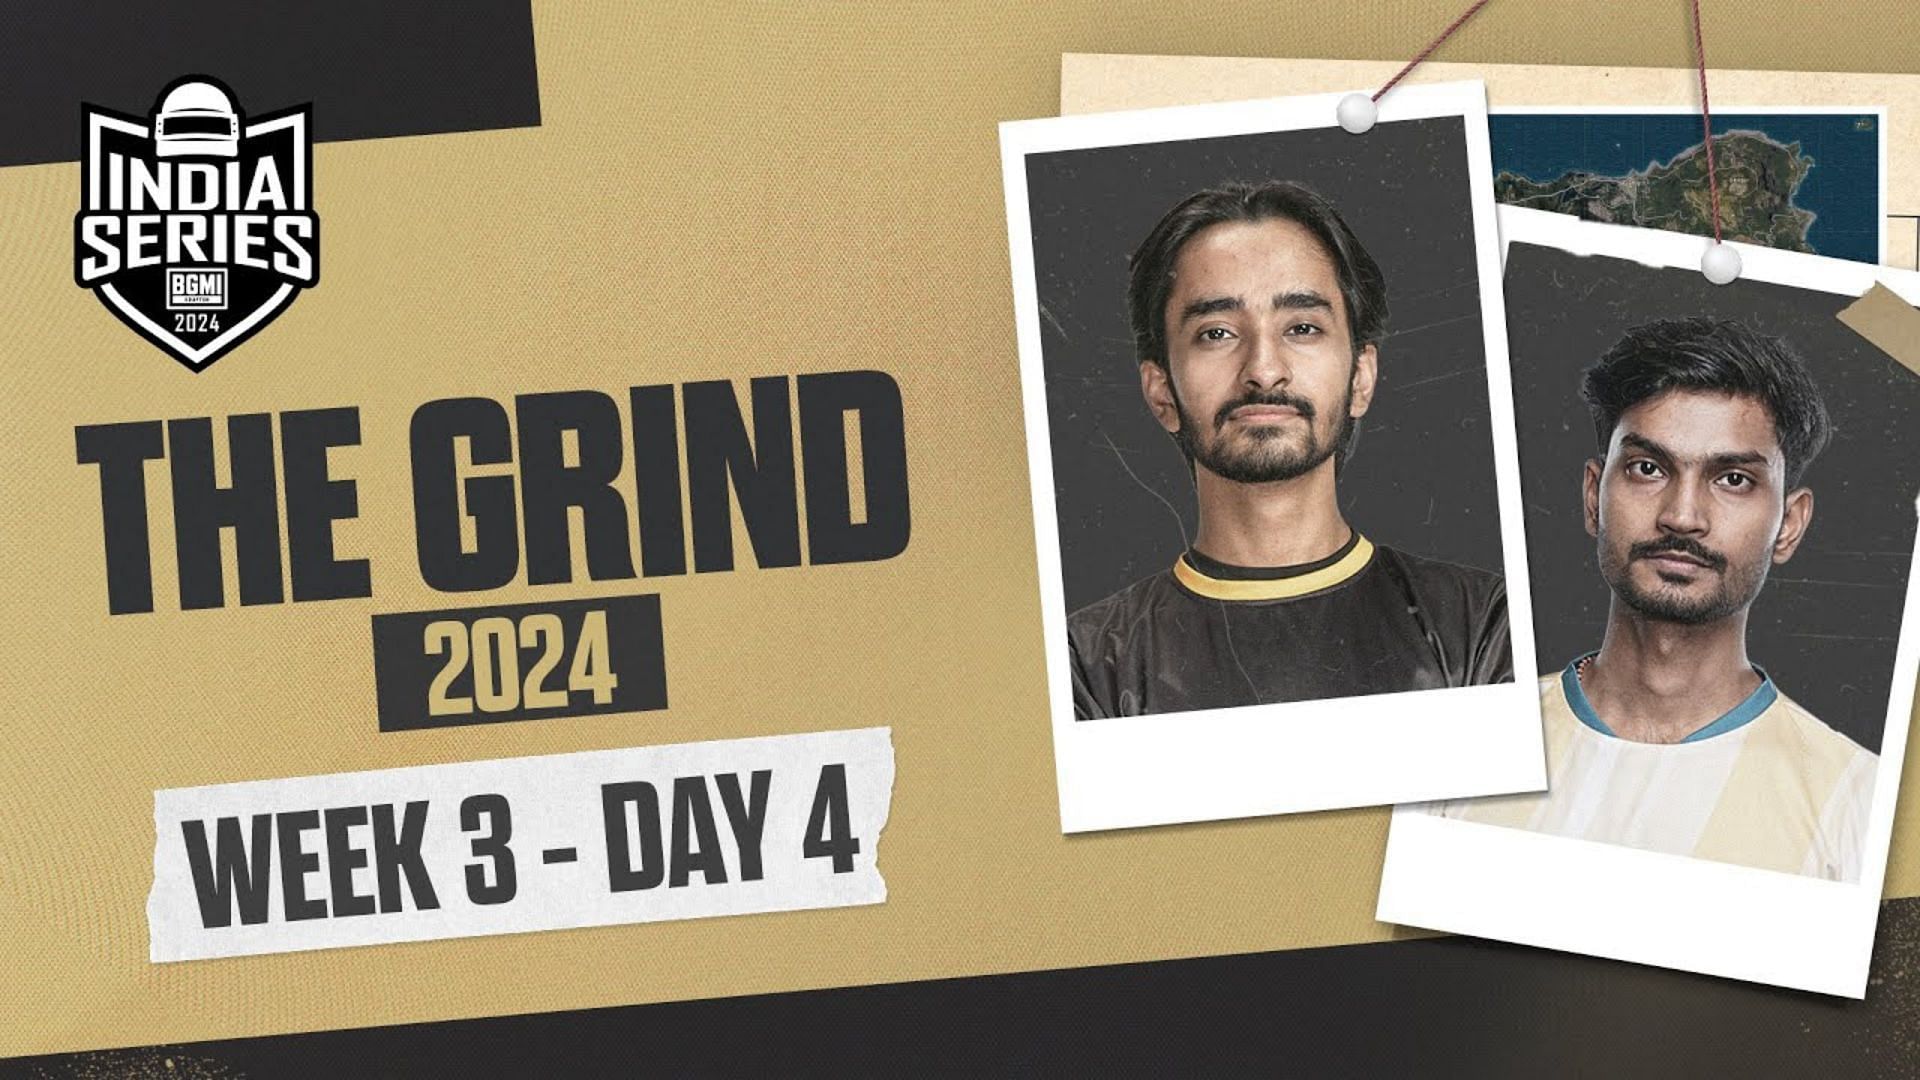 Day 4 of the Grind Week 3 takes place on April 21 (Image via BGMI)